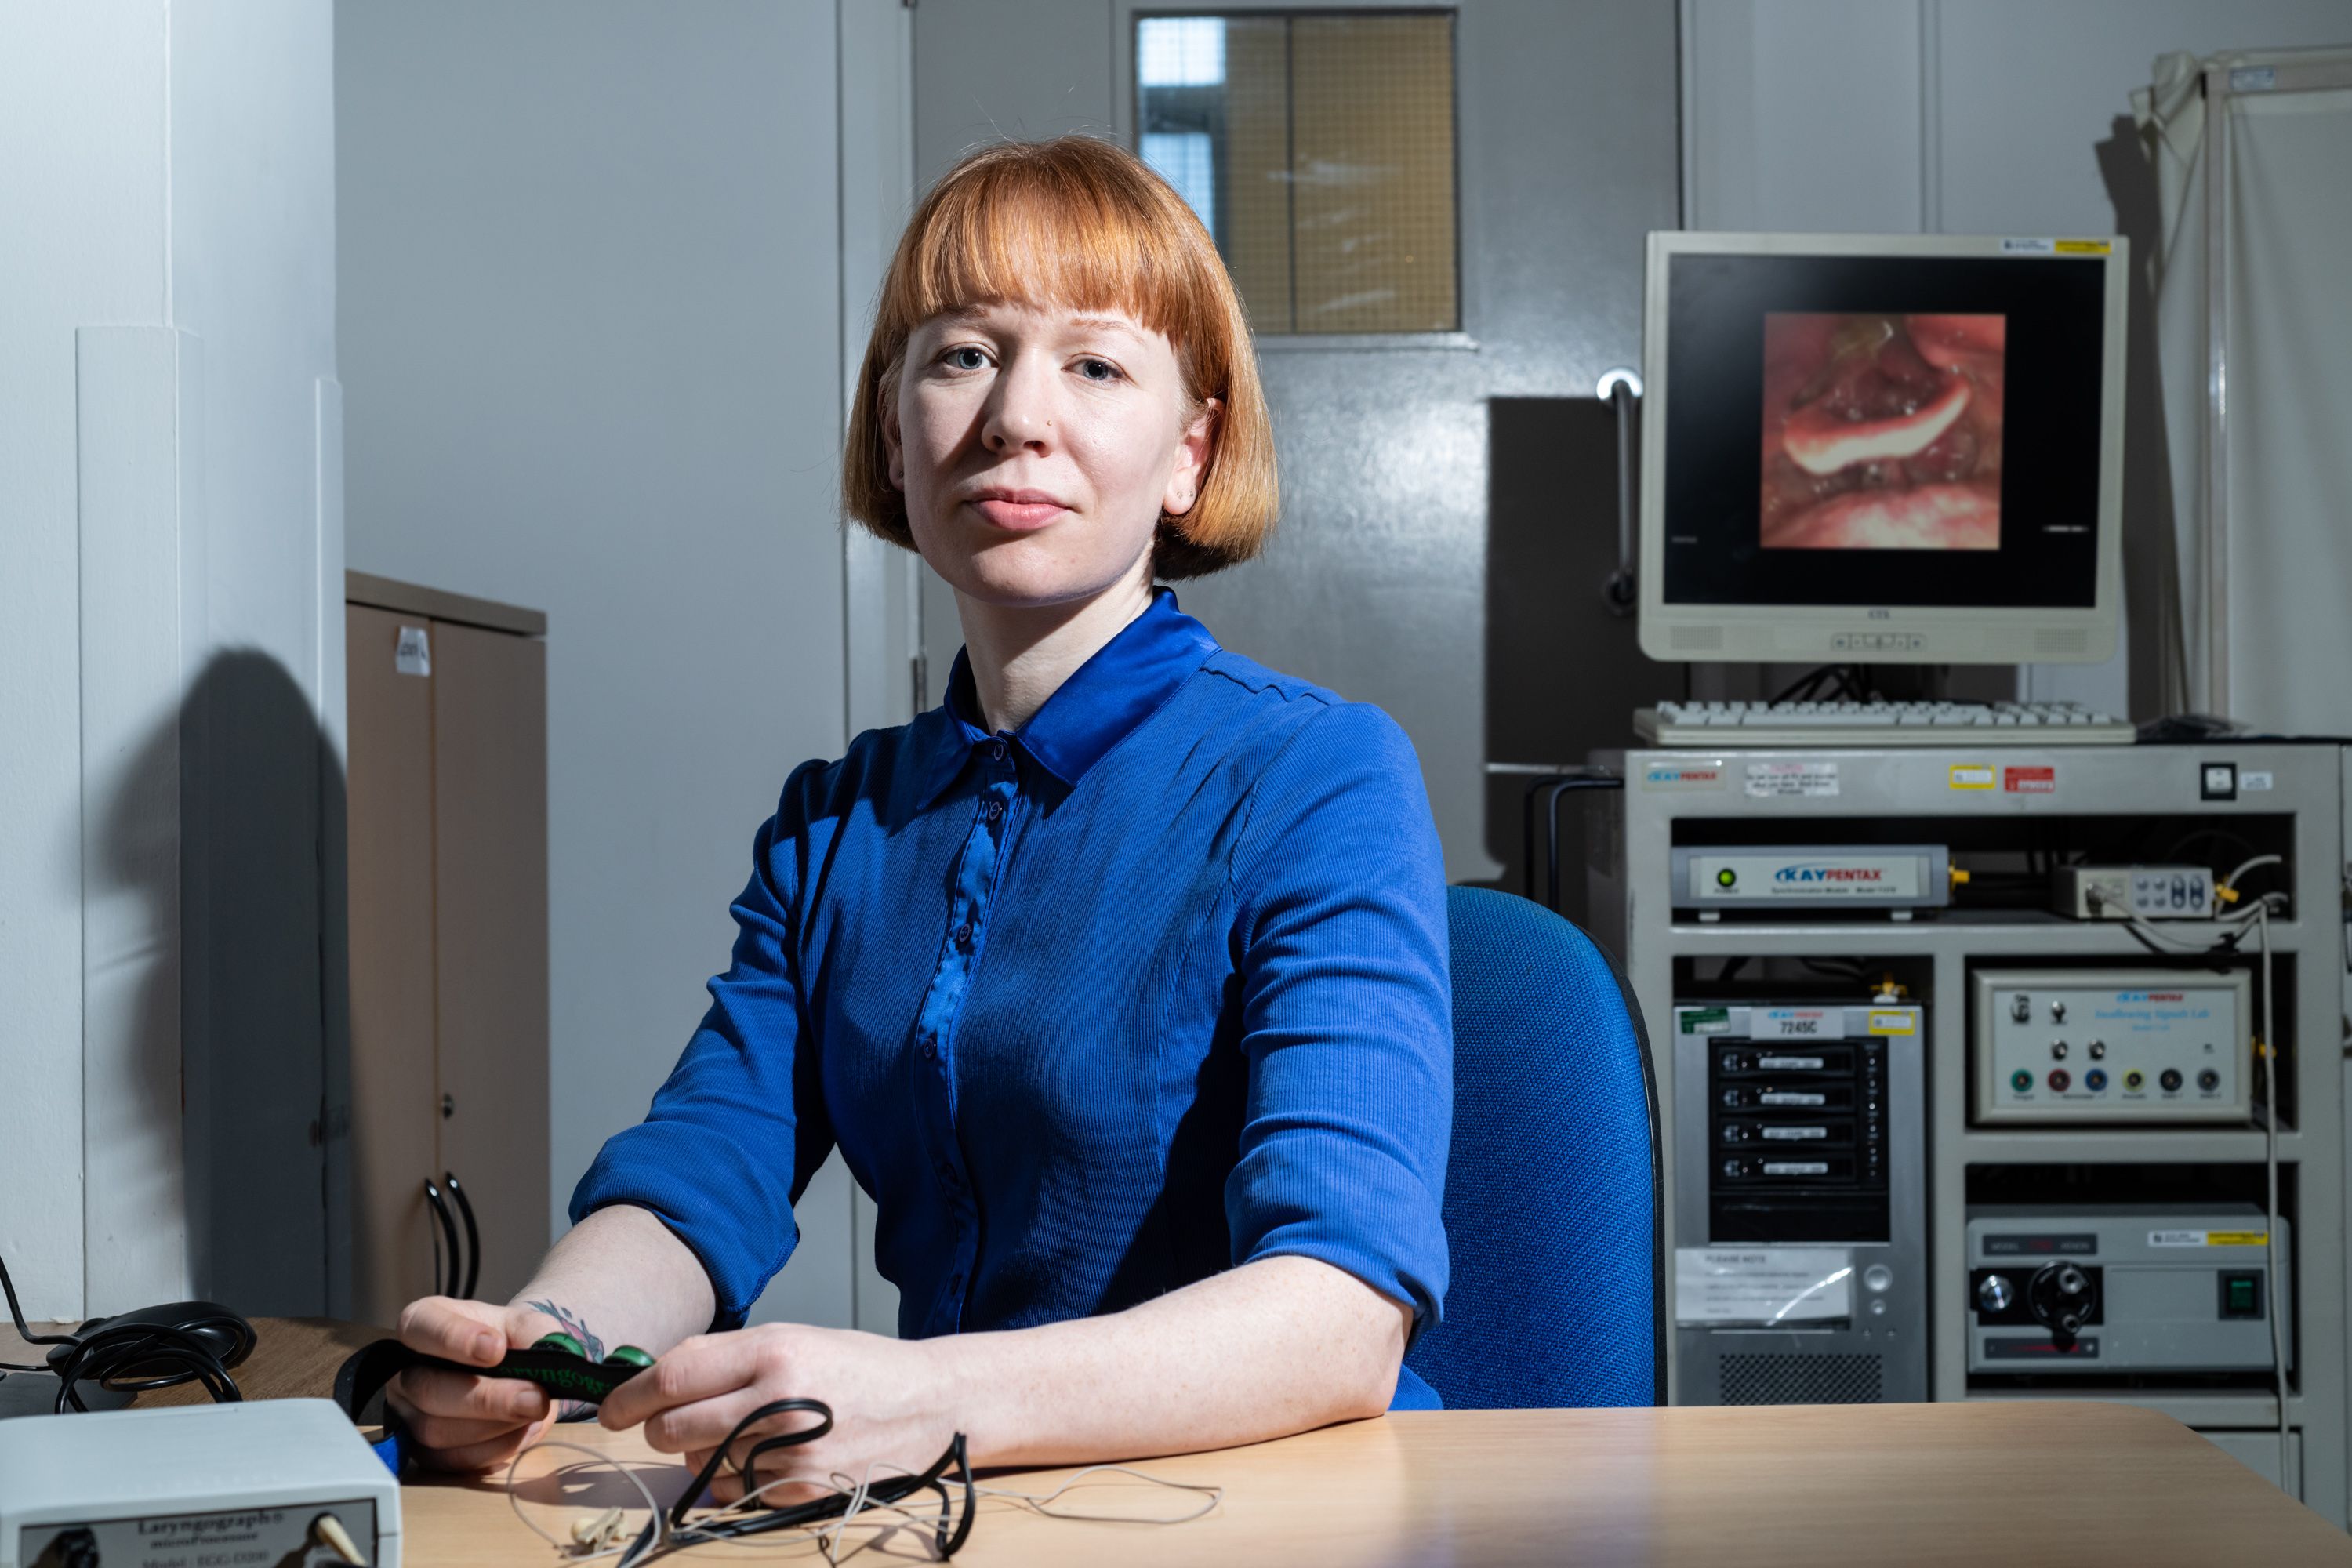 A portrait photograph of Gemma Clunie, sitting at a desk next to electronic equipment